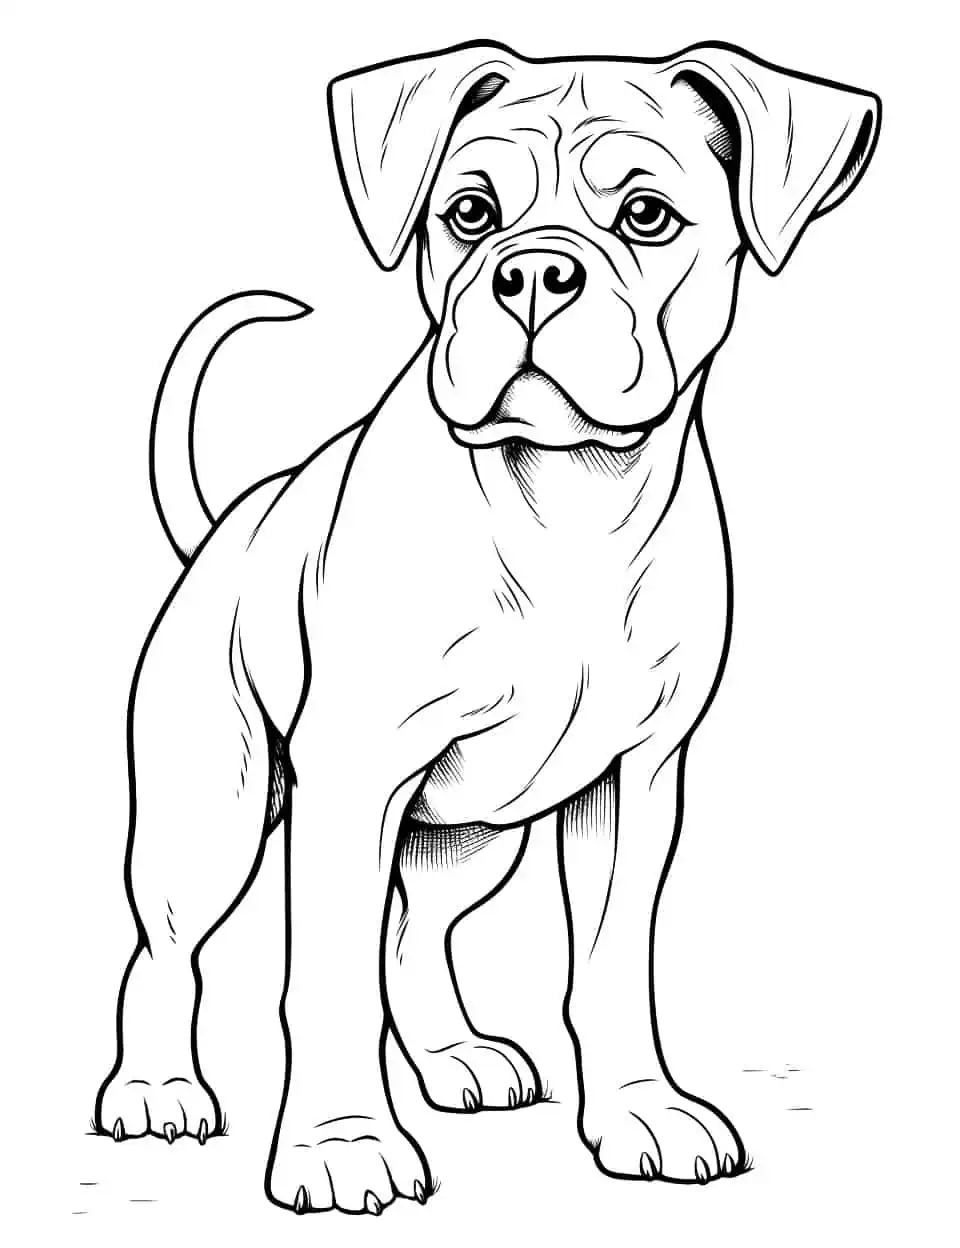 Full Page Boxer Portrait Coloring Page - A full-page, realistic portrait of a Boxer ready to be colored.